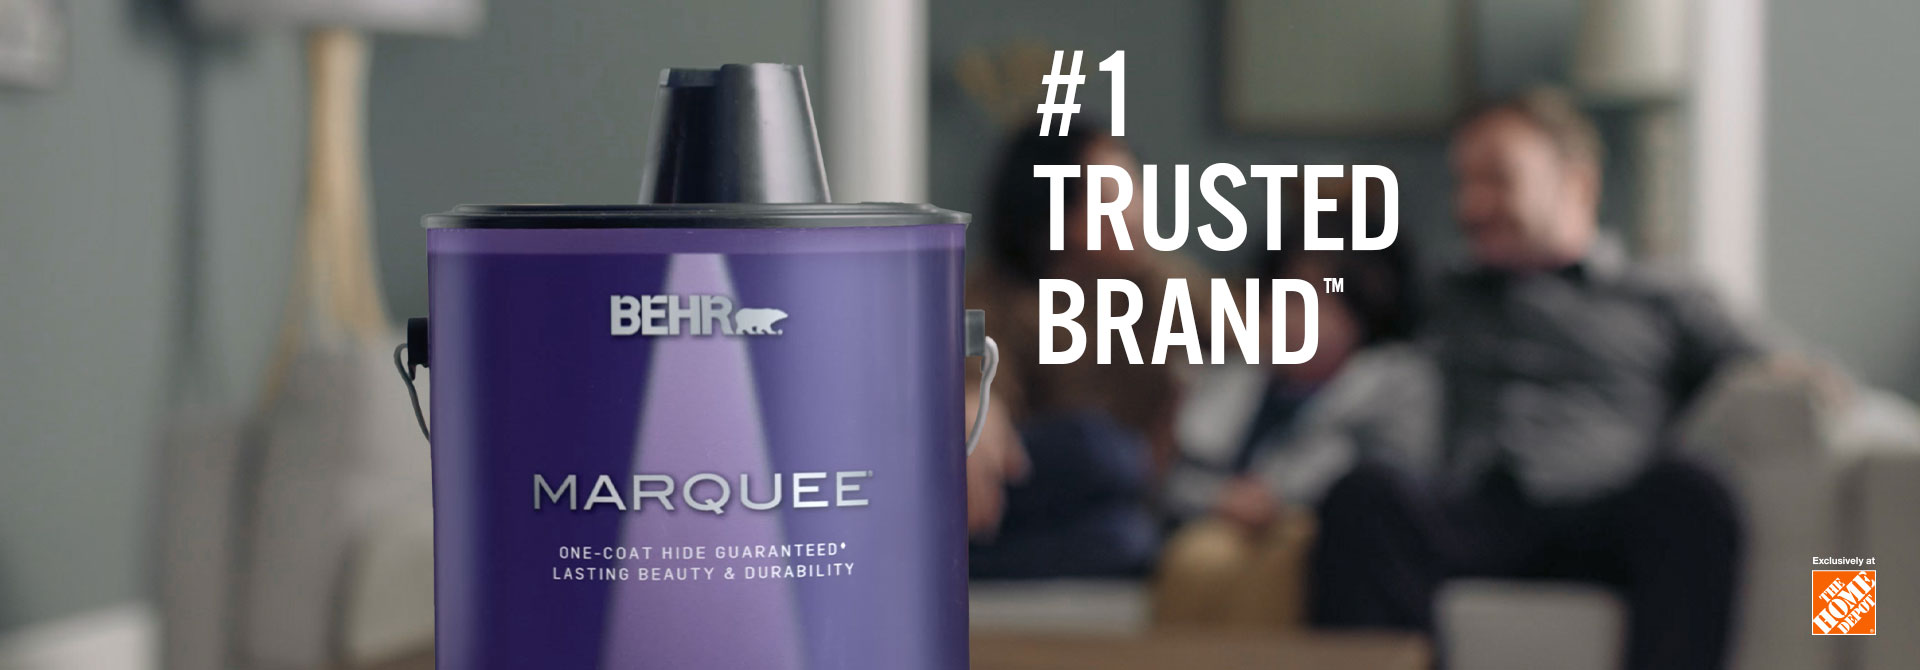 Can of BEHR MARQUEE interior paint and the words #1 Trusted Paint Brand in foreground.